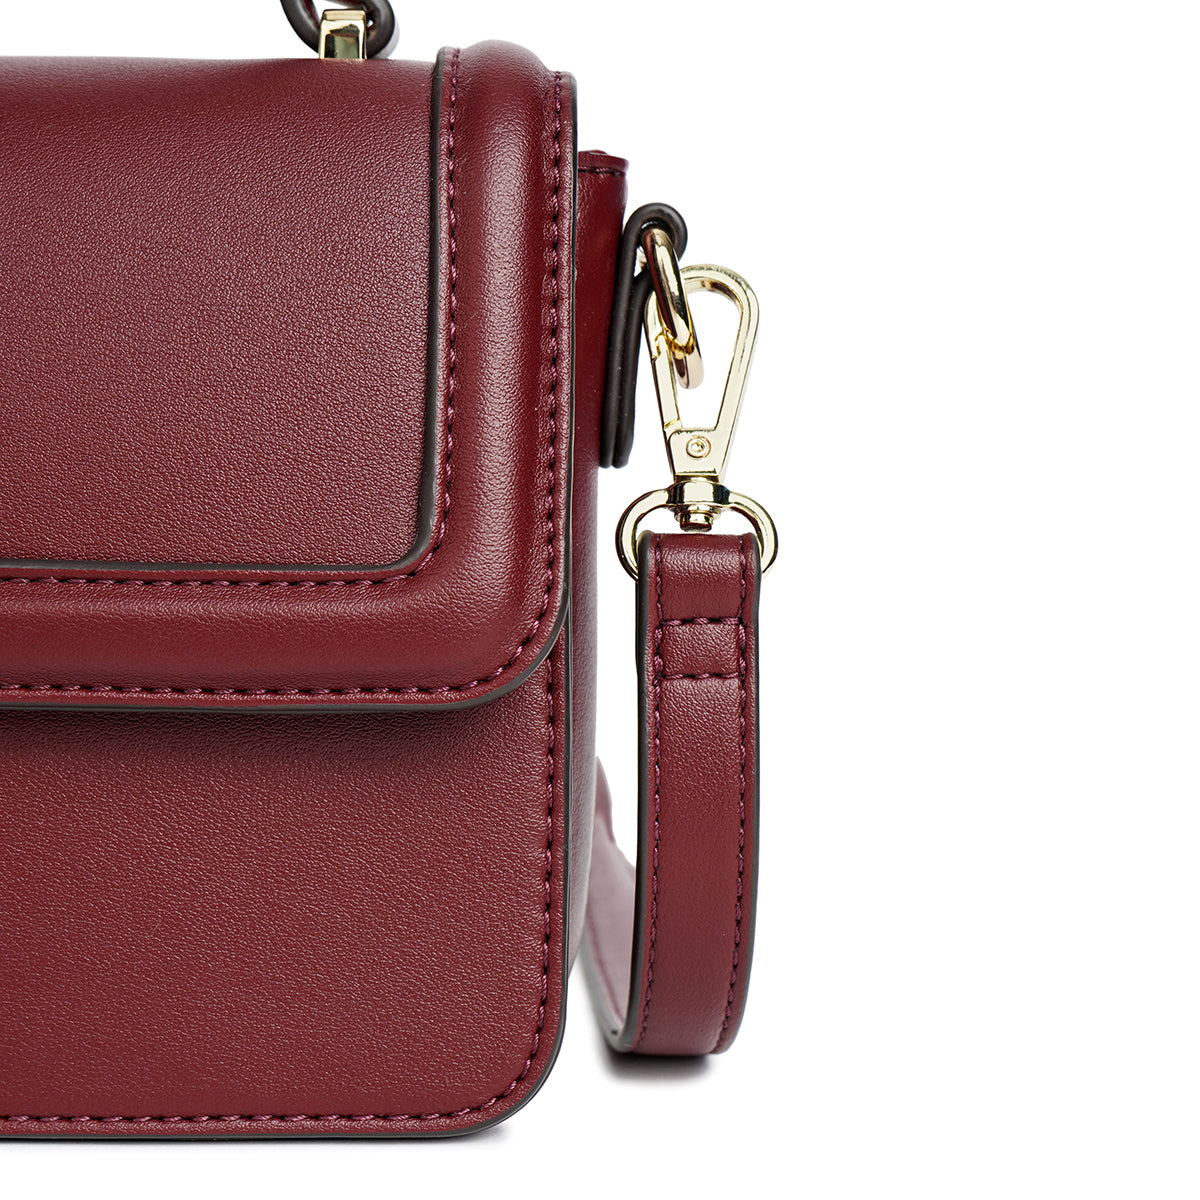 Practical and light handbag with a shoulder strap, width 21 cm, in maroon or blue colors